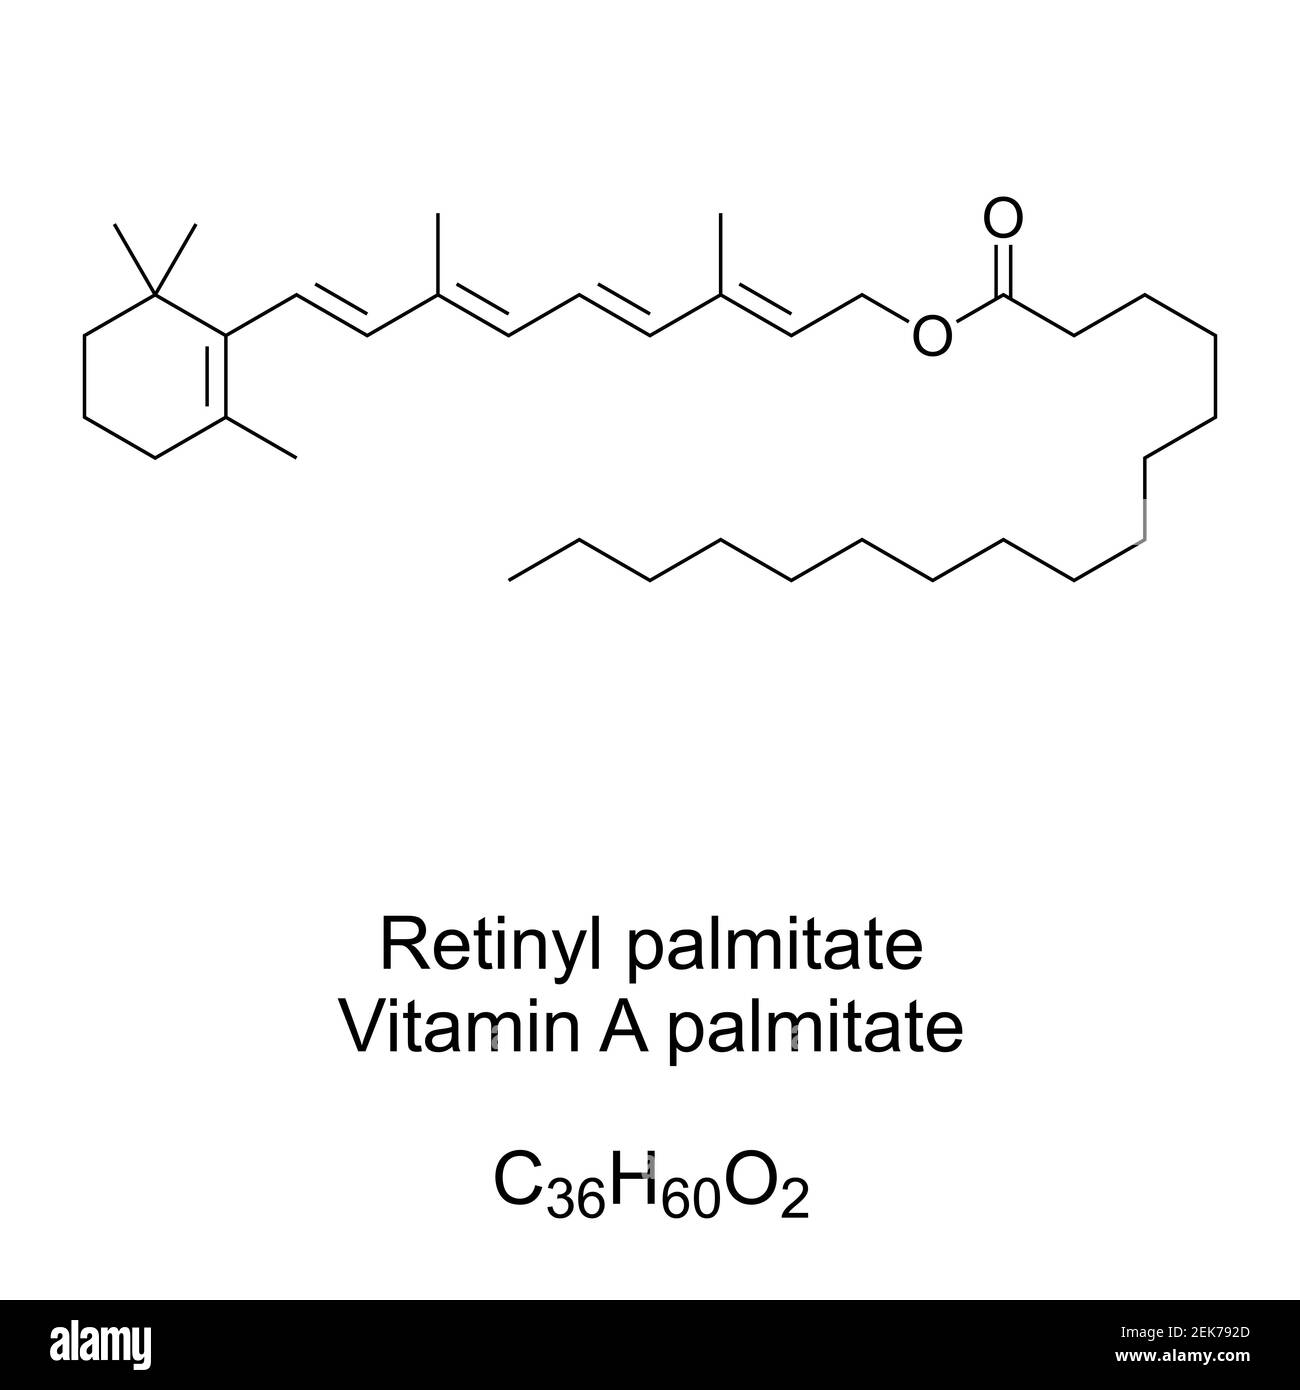 Retinyl palmitate, or vitamin A palmitate, chemical formula and skeletal structure. Most abundant form of vitamin A storage and vitamin supplement. Stock Photo